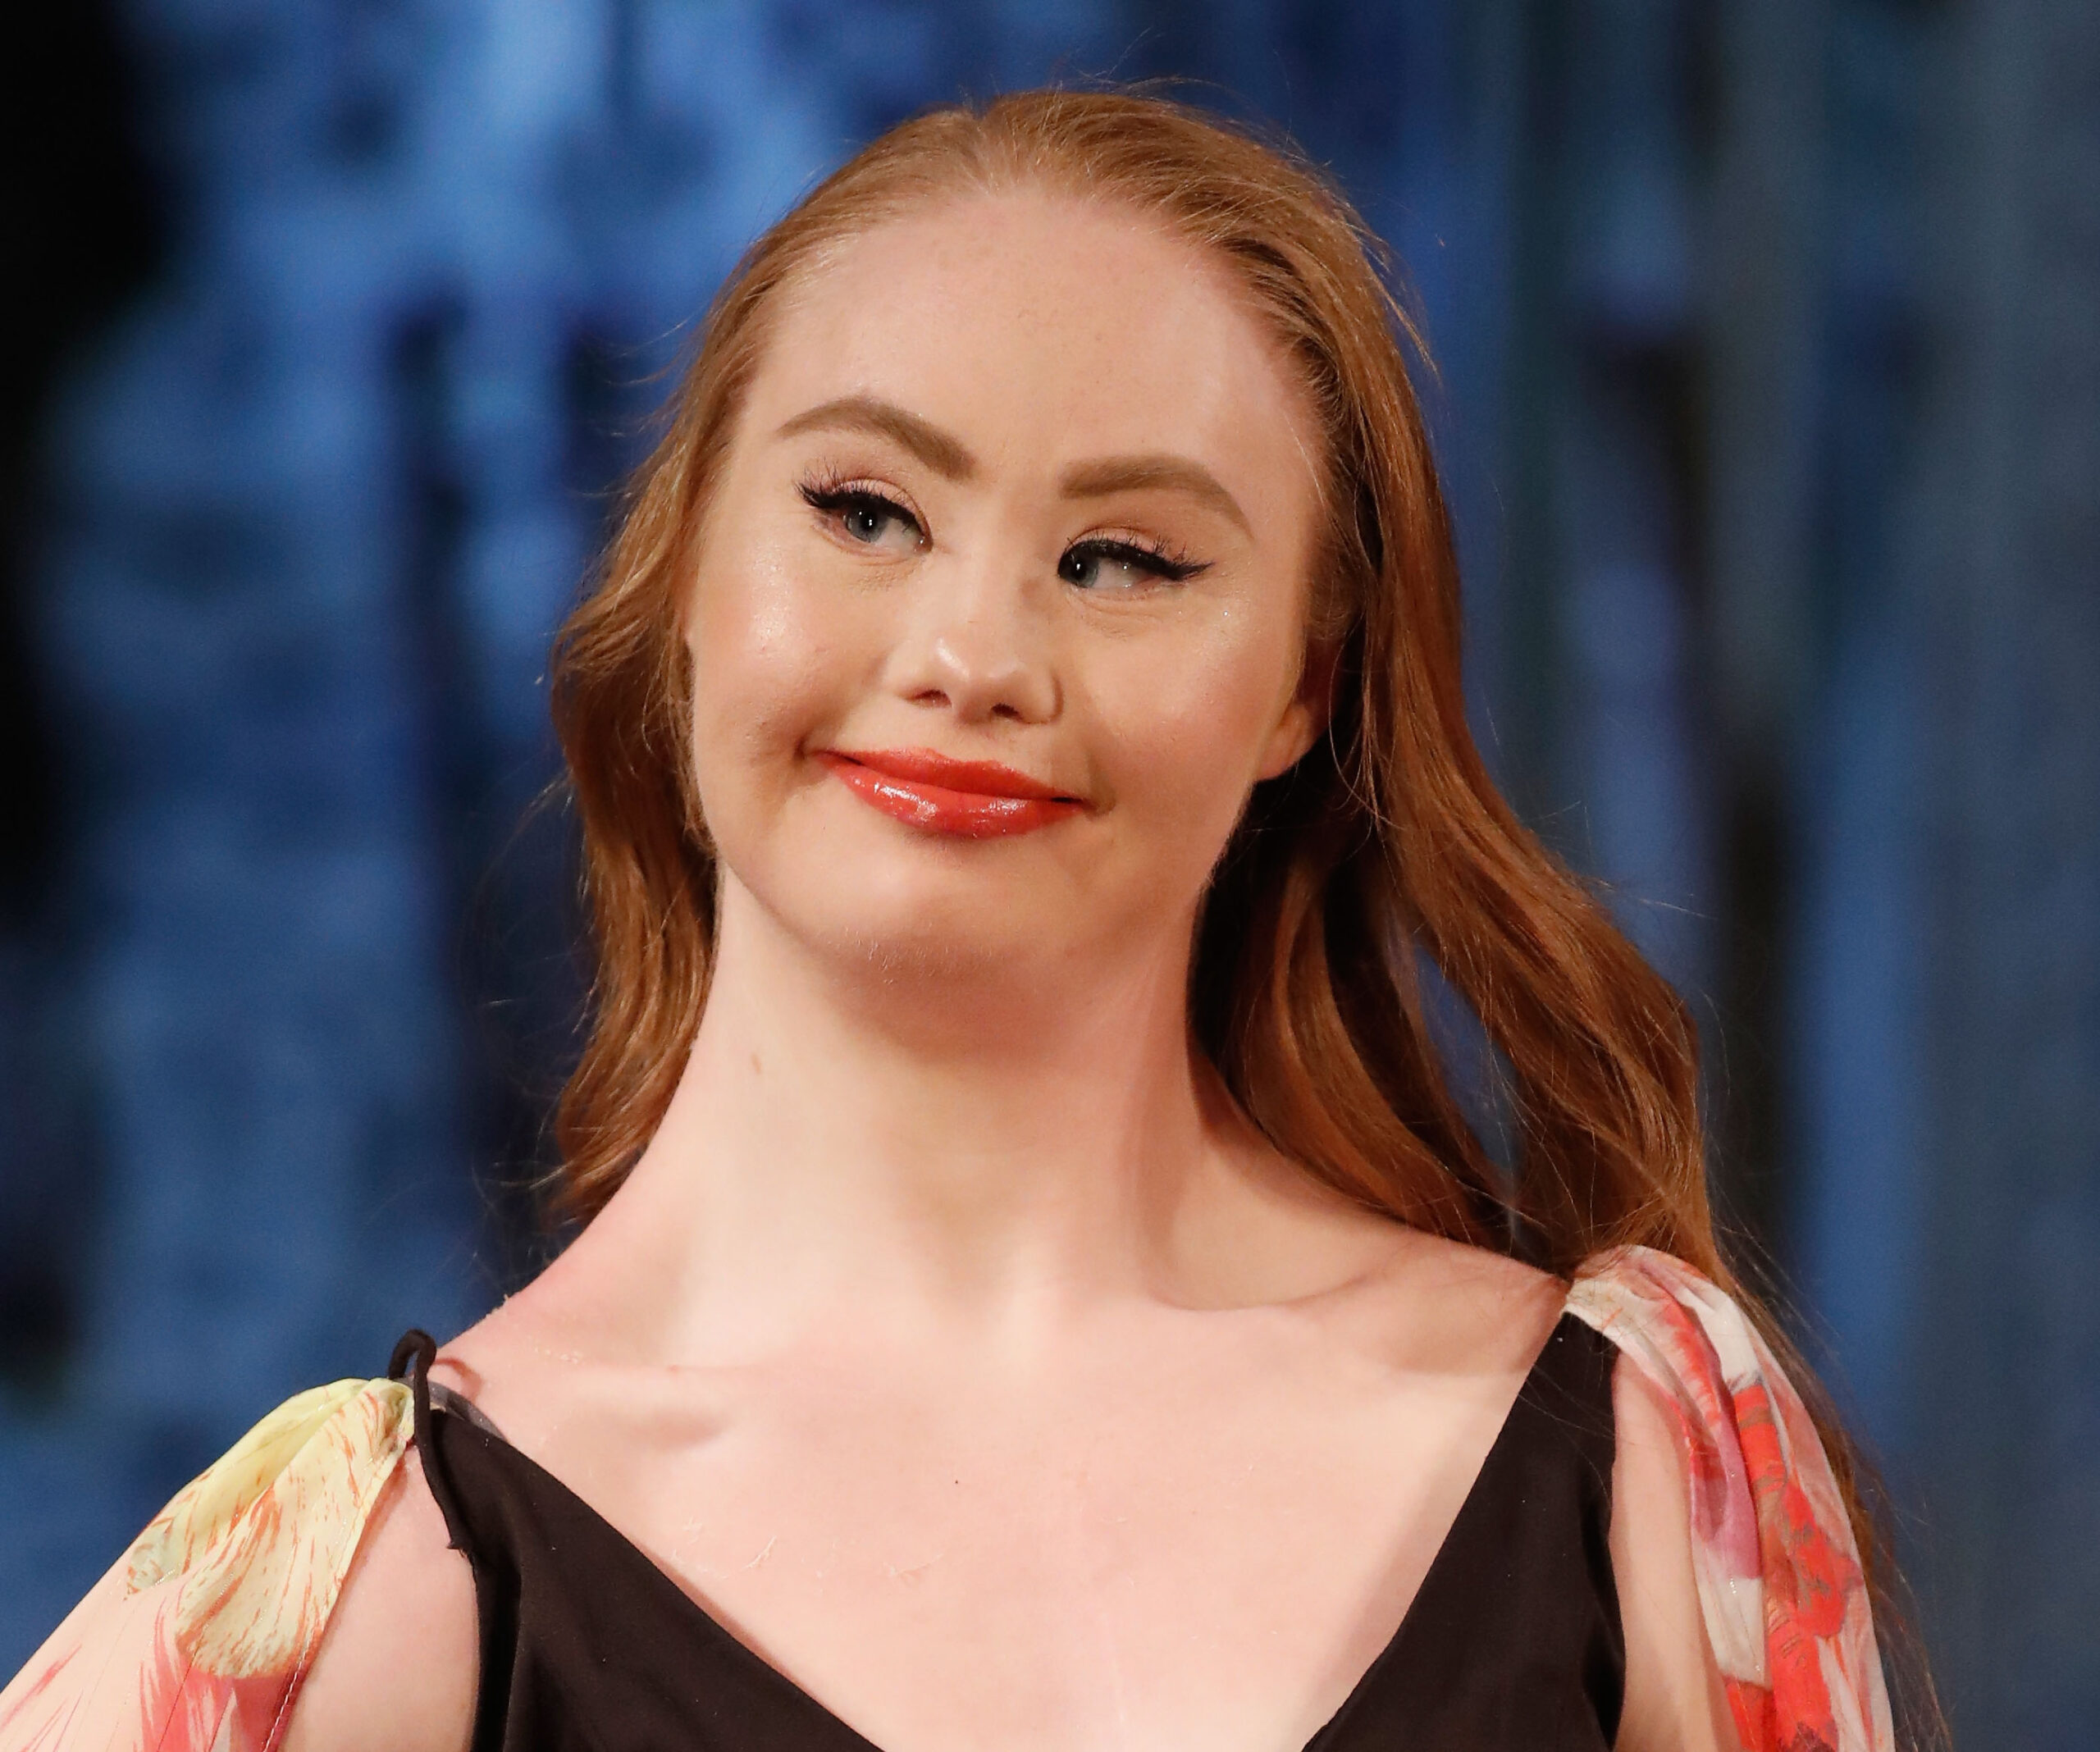 EXCLUSIVE: The inspirational story of model Madeline Stuart will blow your mind